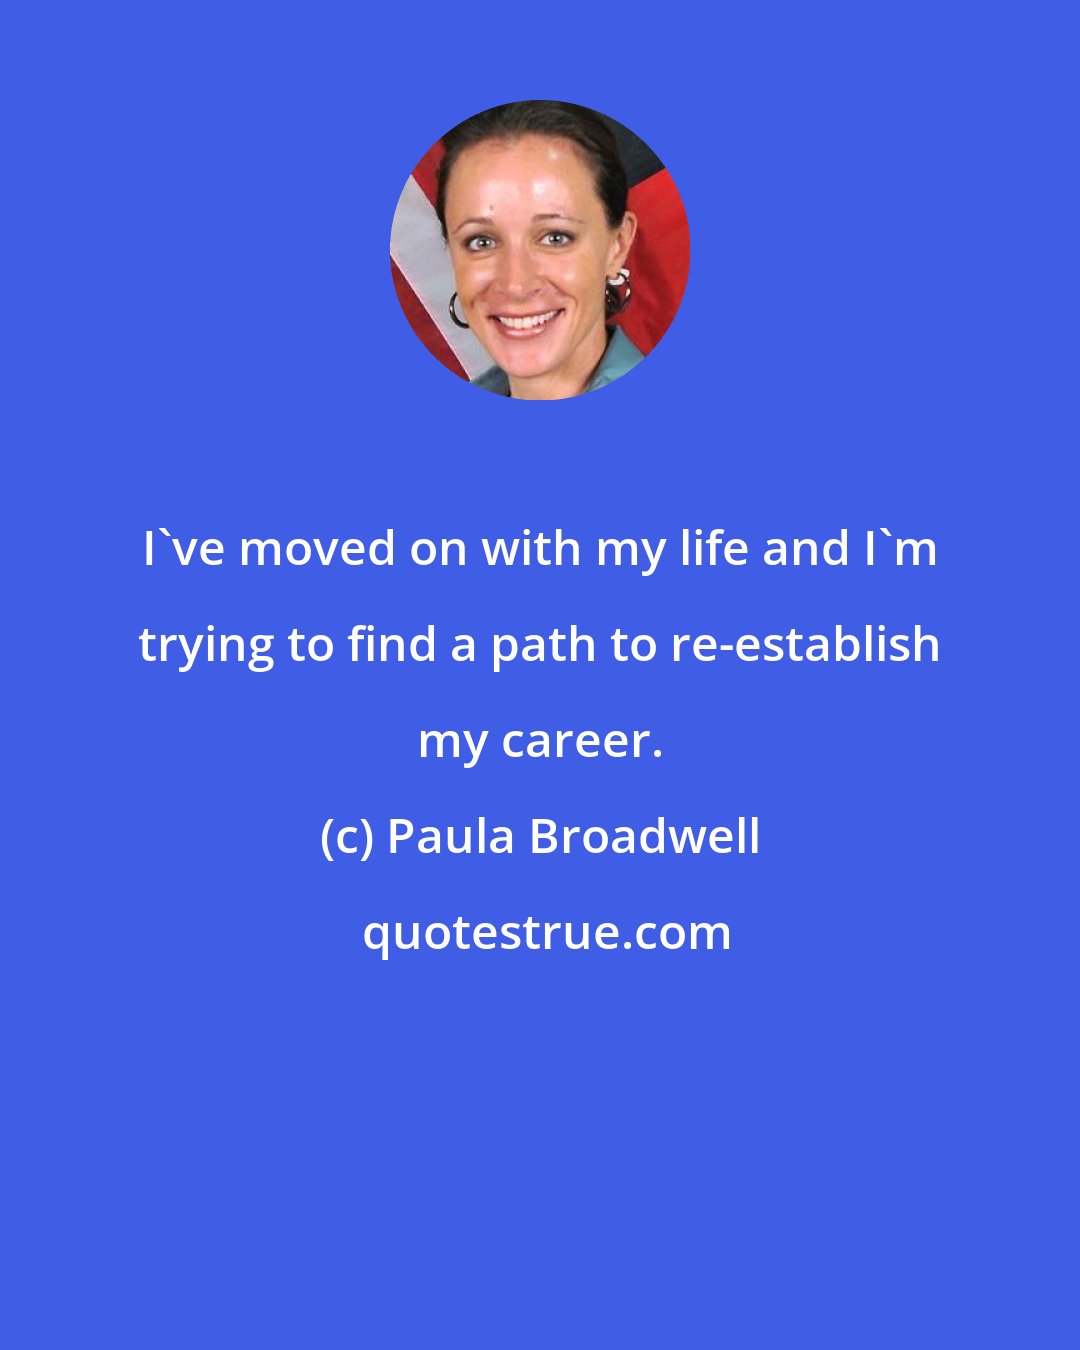 Paula Broadwell: I've moved on with my life and I'm trying to find a path to re-establish my career.